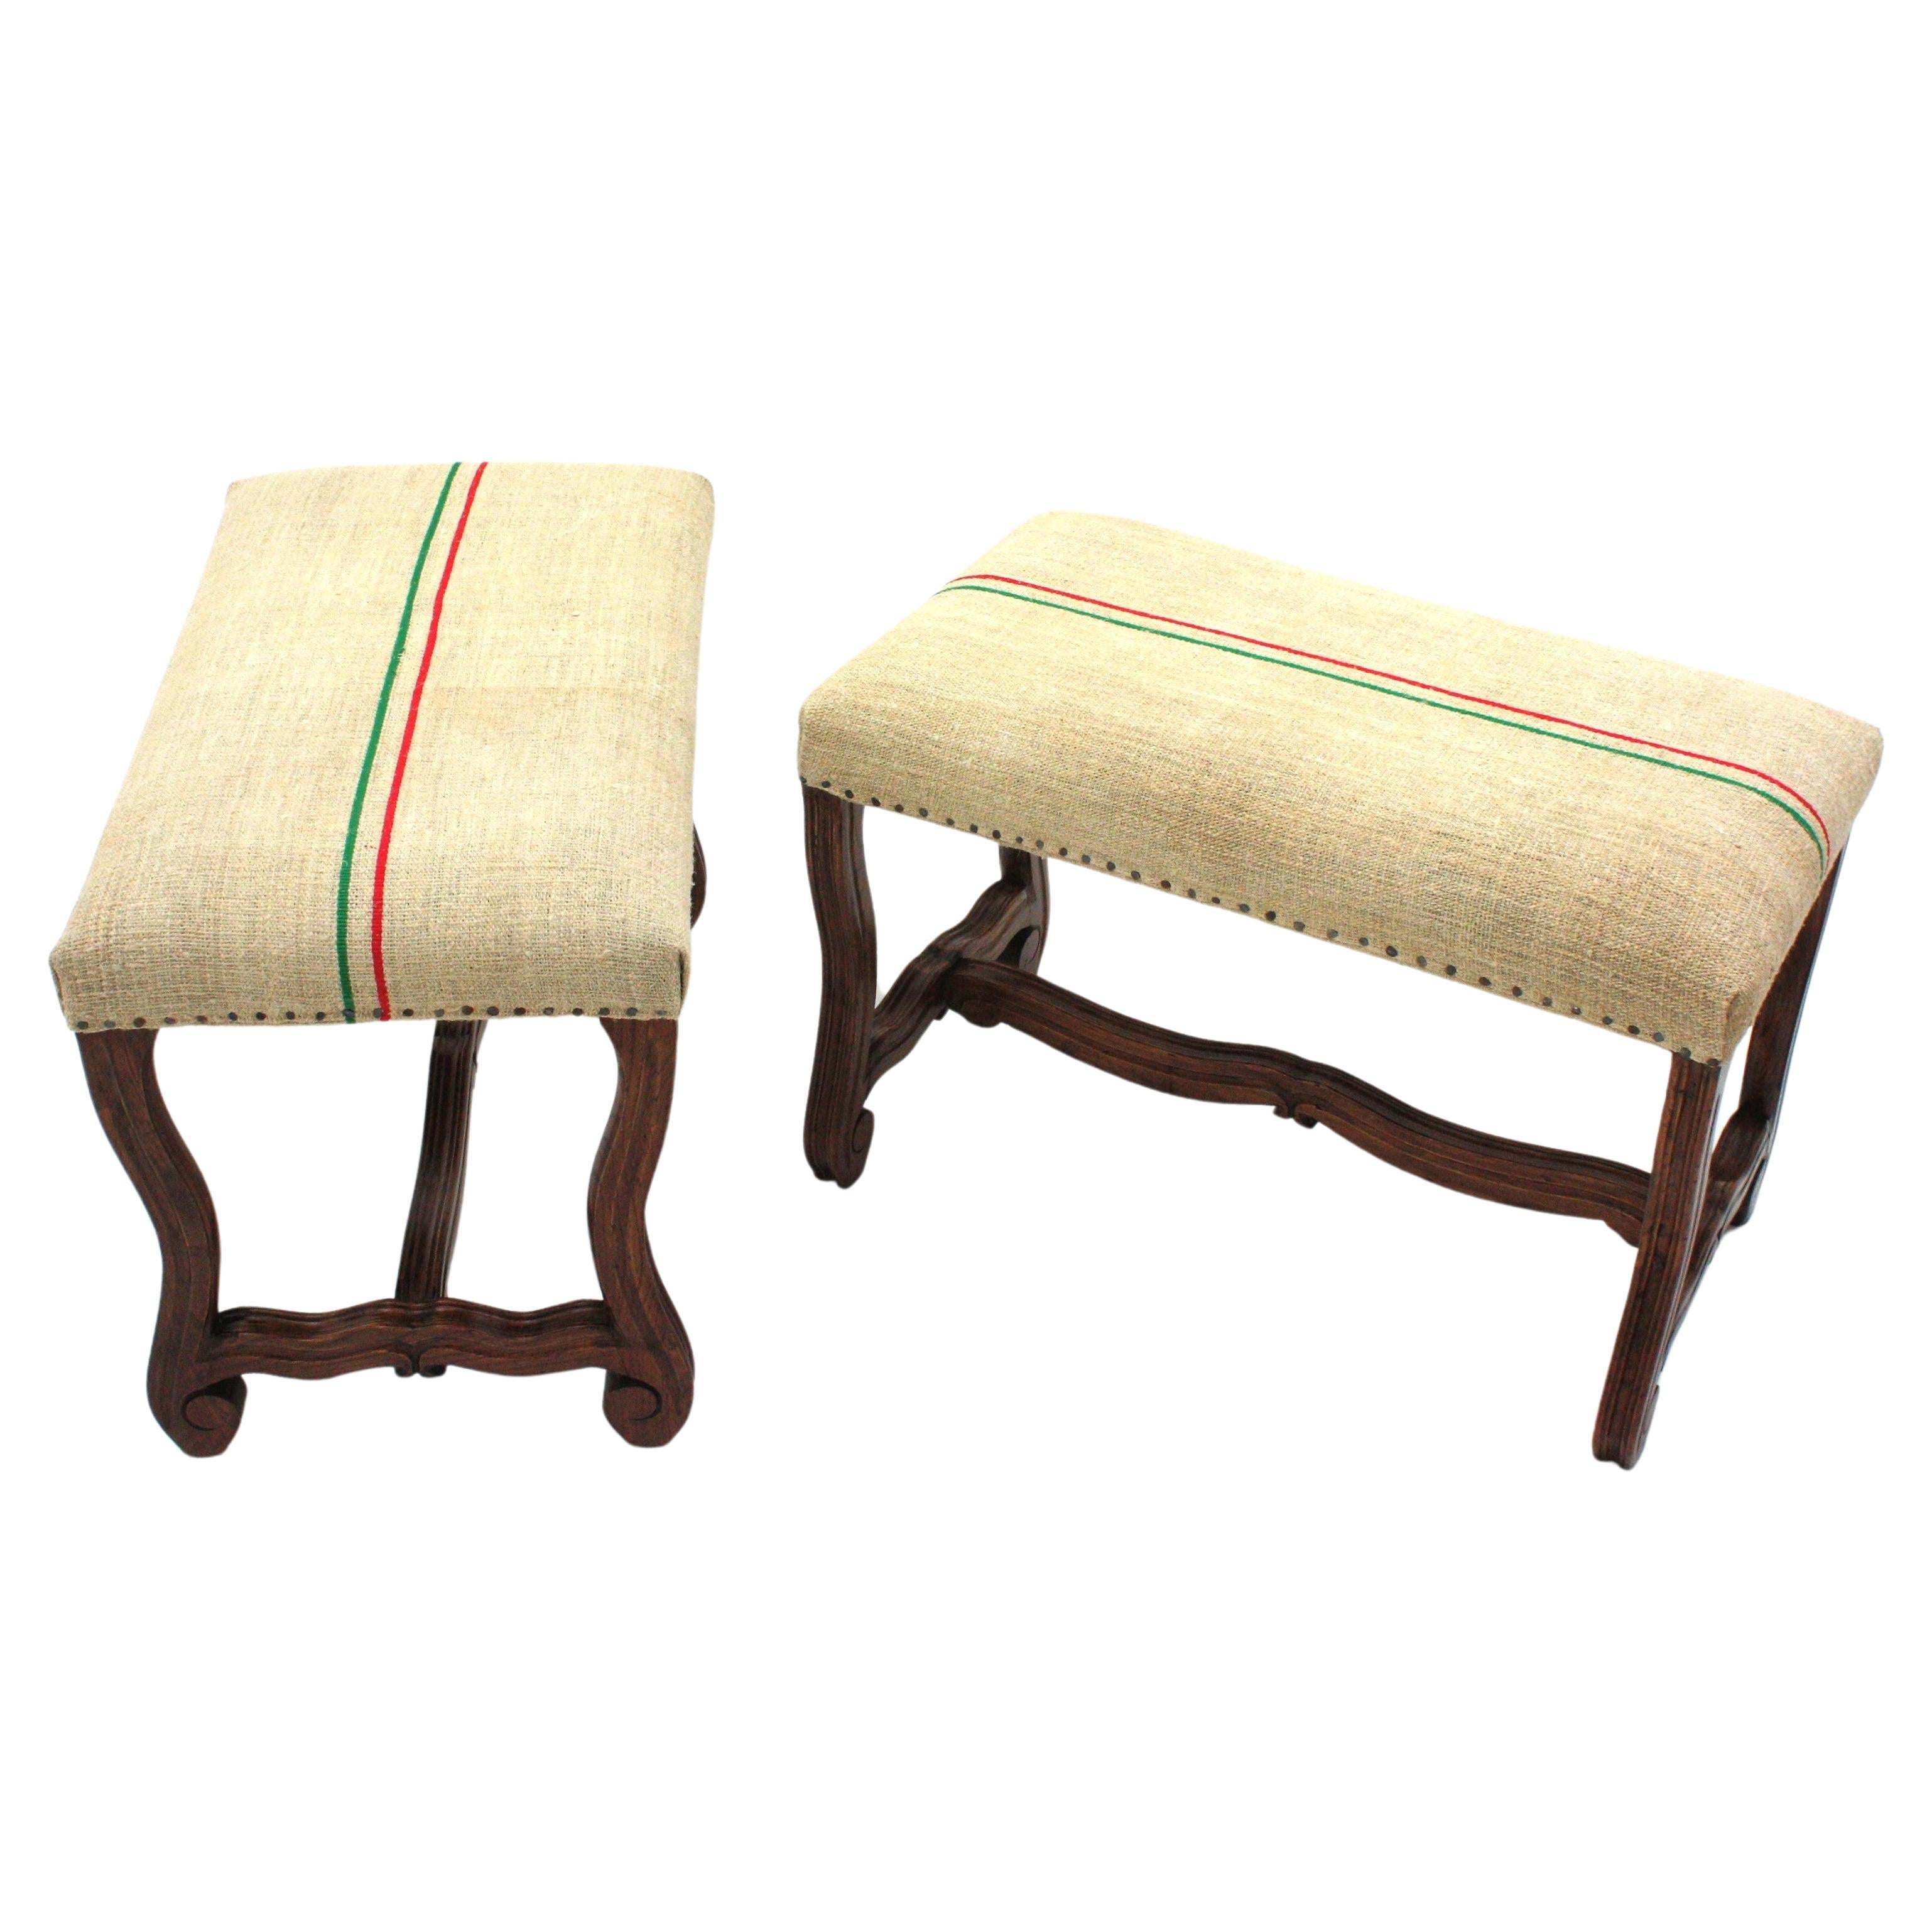 Hand-Carved Pair of Os de Mouton Louis XIV Oak Stools New Upholstered in French Linen  For Sale